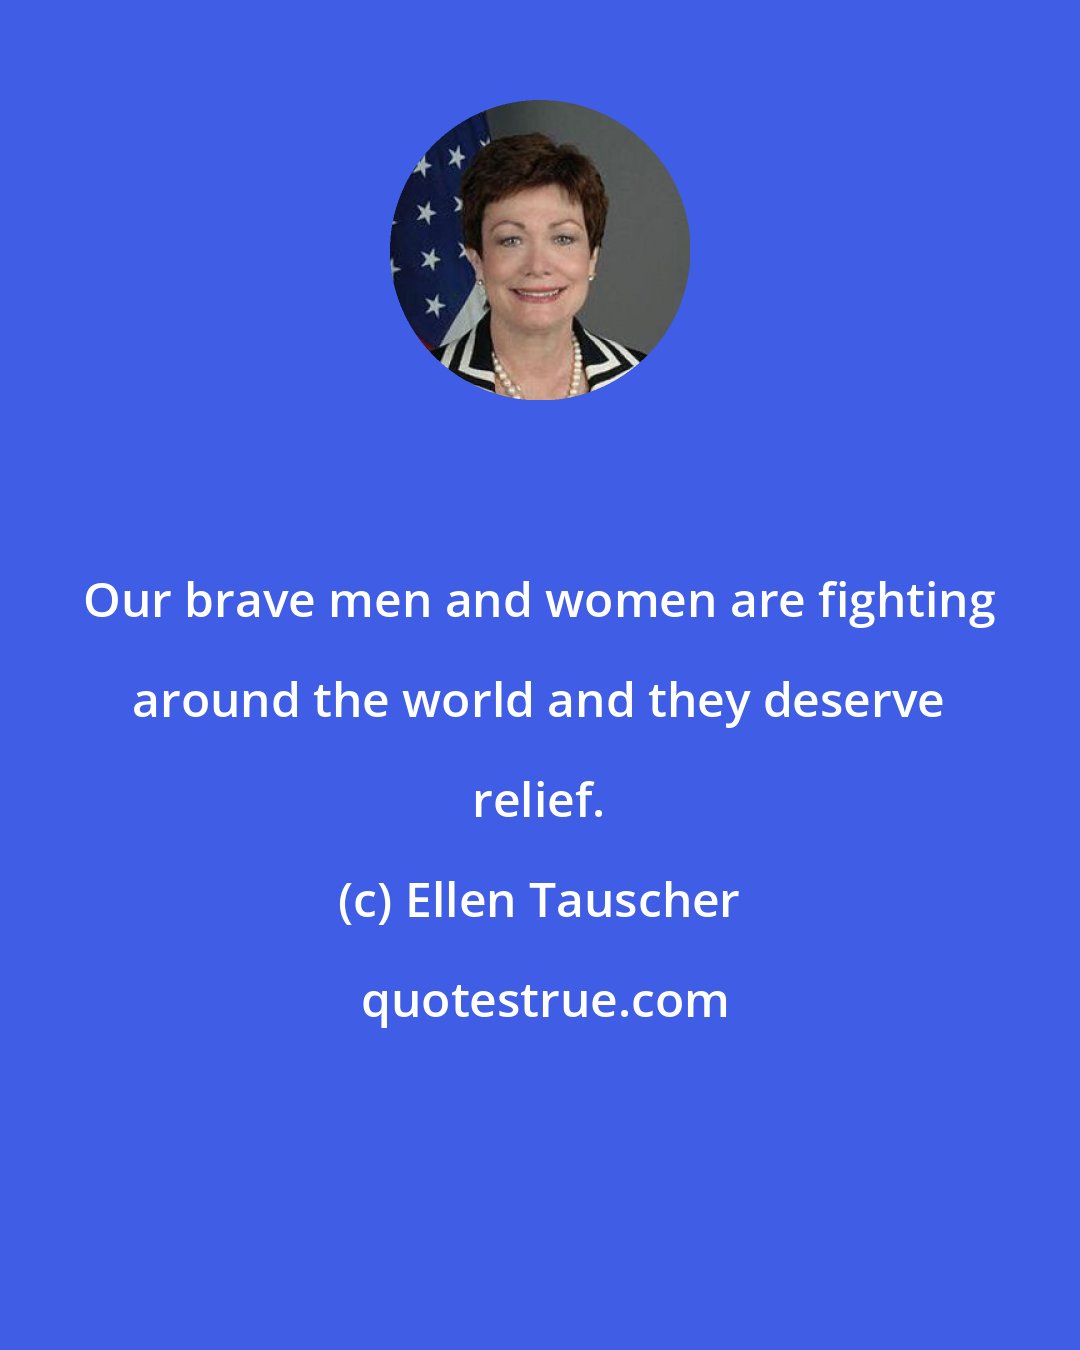 Ellen Tauscher: Our brave men and women are fighting around the world and they deserve relief.